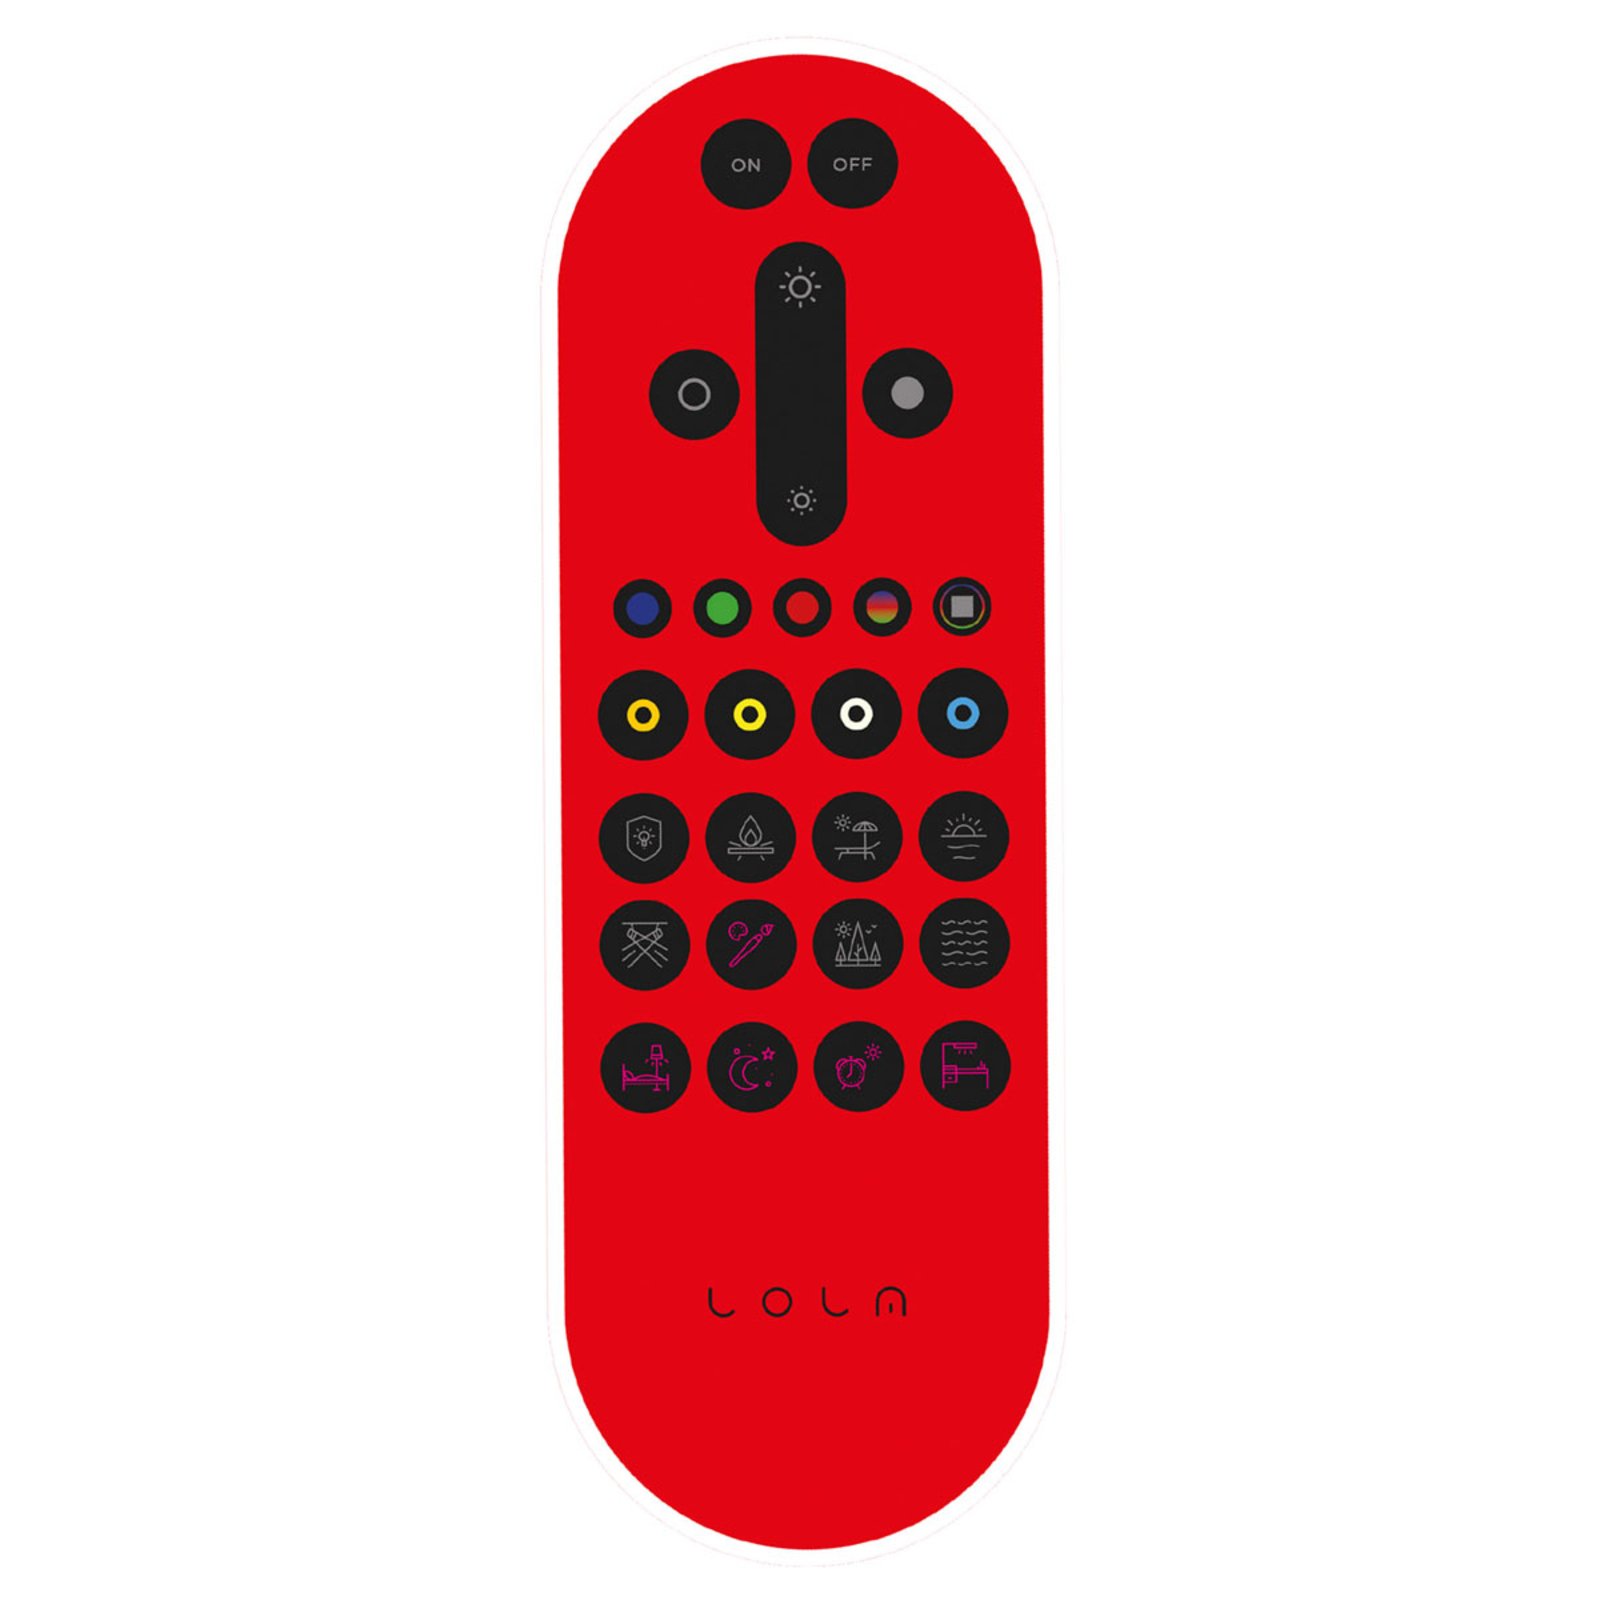 Multifunctional remote control for Lola series